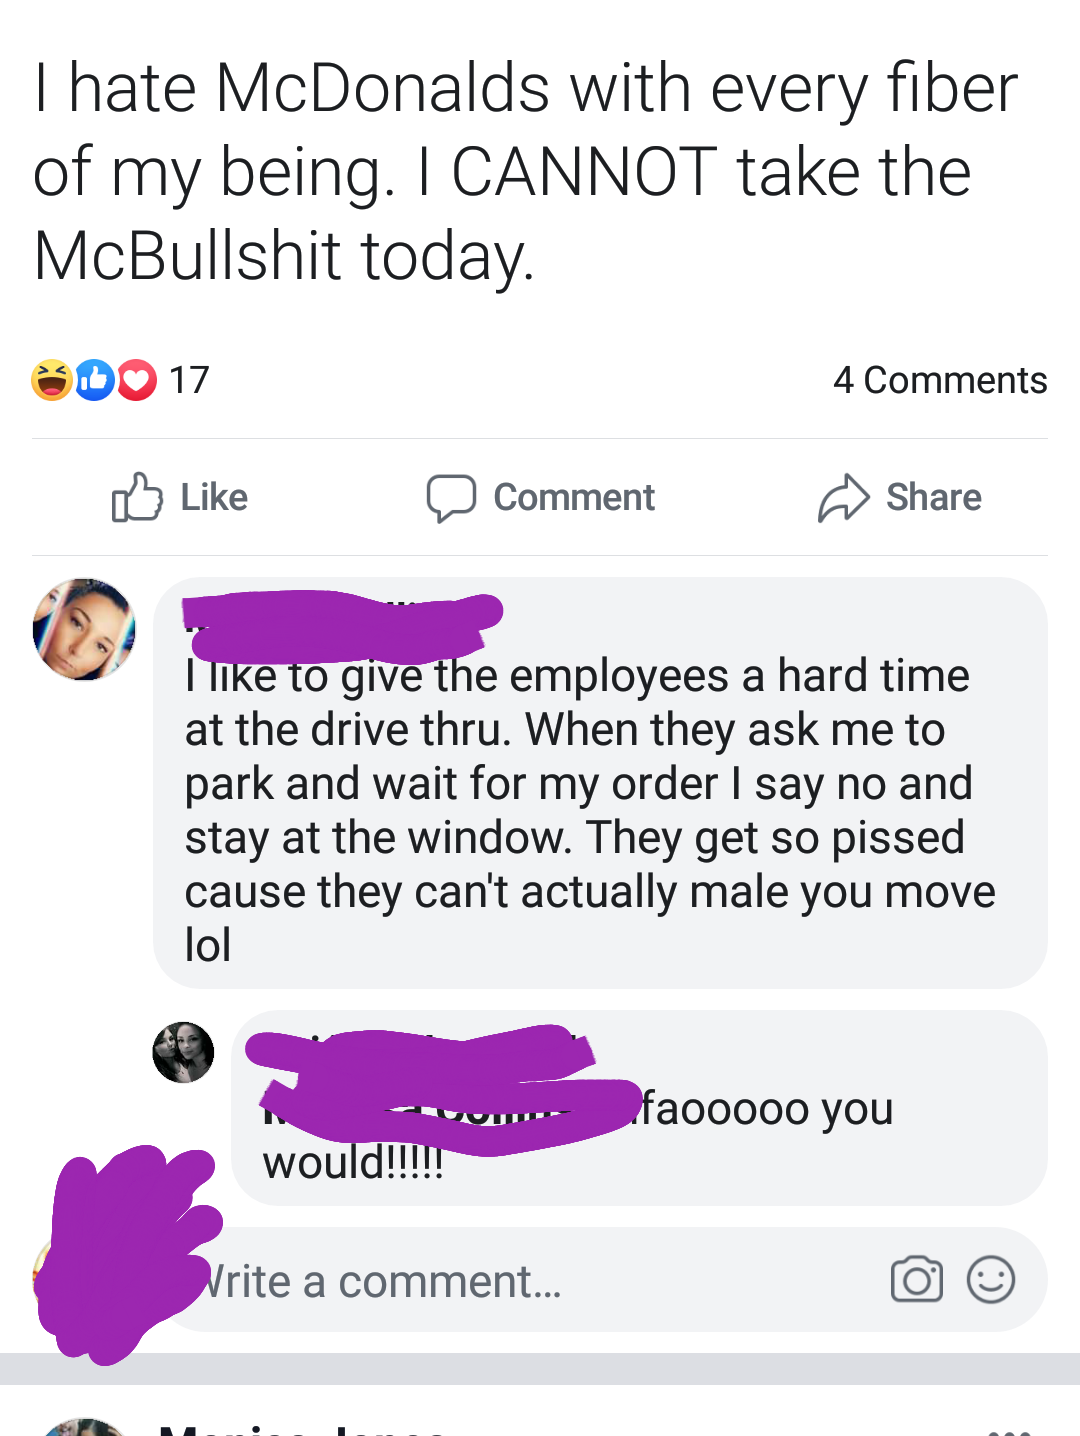 Thate McDonalds with every fiber of my being. I Cannot take the McBullshit today. Sdo 17 4 a Comment I to give the employees a hard time at the drive thru. When they ask me to park and wait for my order I say no and stay at the window. They get so pissed…